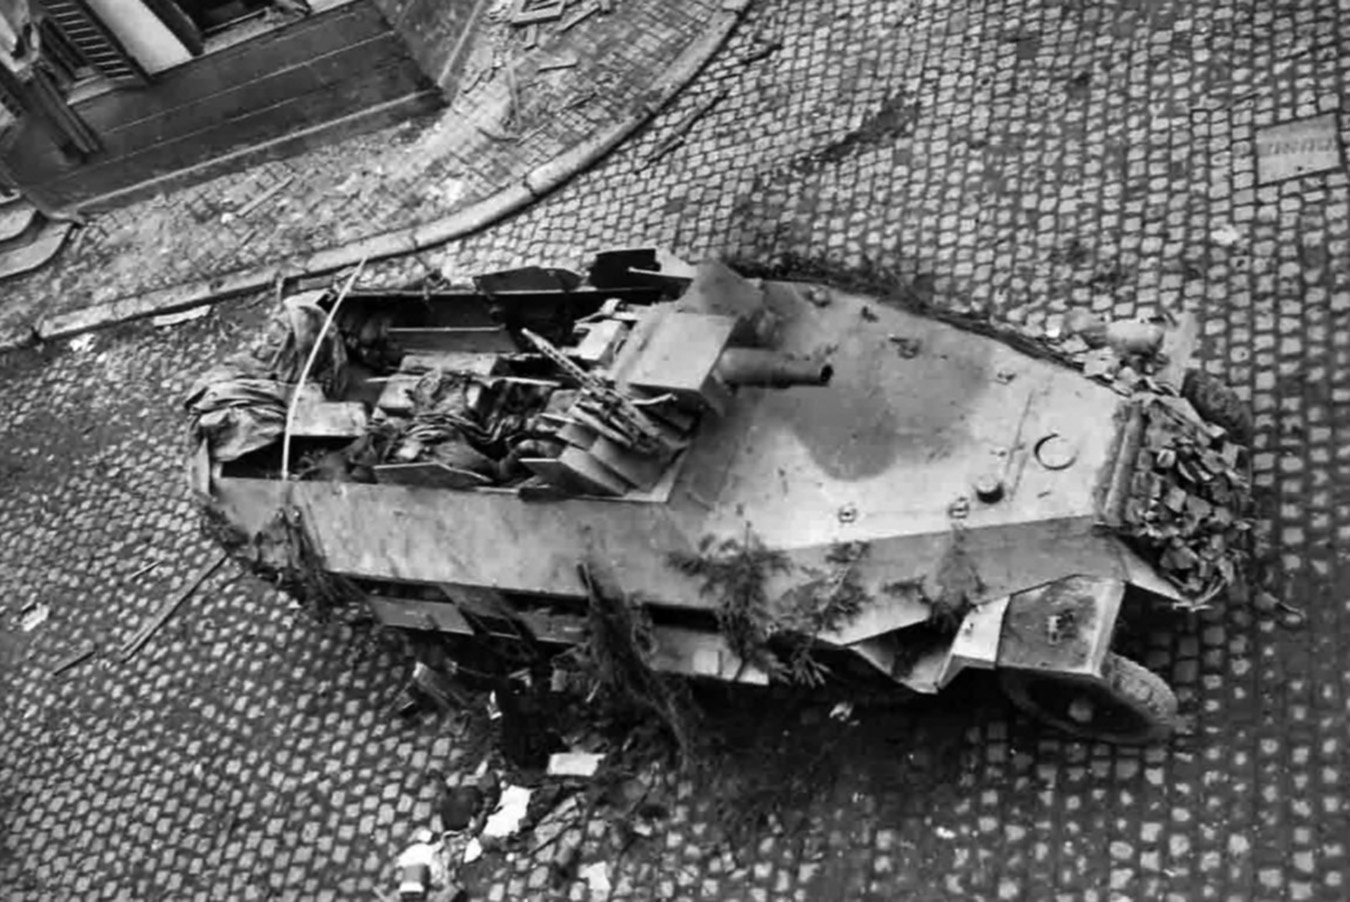 A German halftrack lies knocked out in the middle of a French village after falling victim to fire from American troops. The halftrack mounts a 75mm gun used for close infantry support and is deadly in street-to-street fighting.